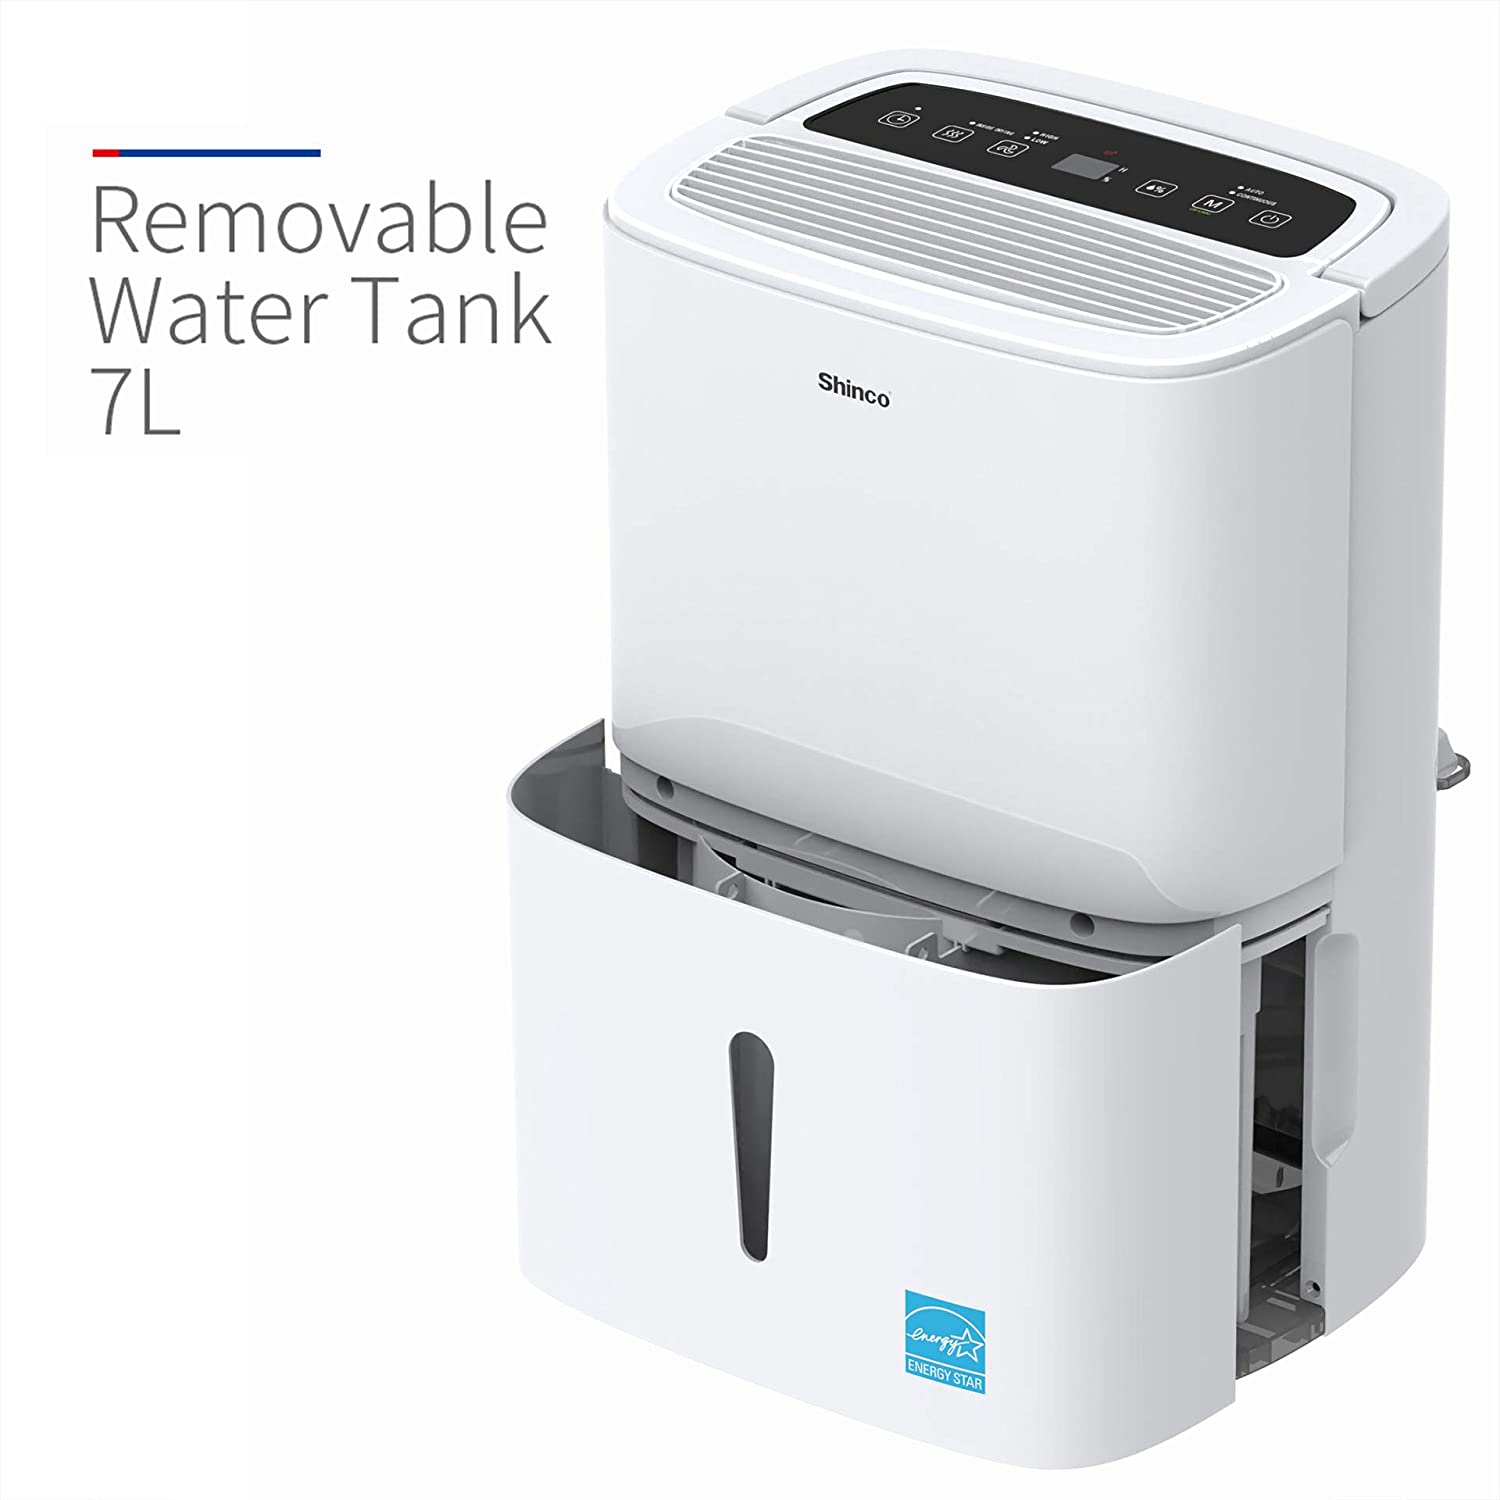 10 BEST DEHUMIDIFIER WITH PUMP 2021 REVIEW AUTO-DRAIN